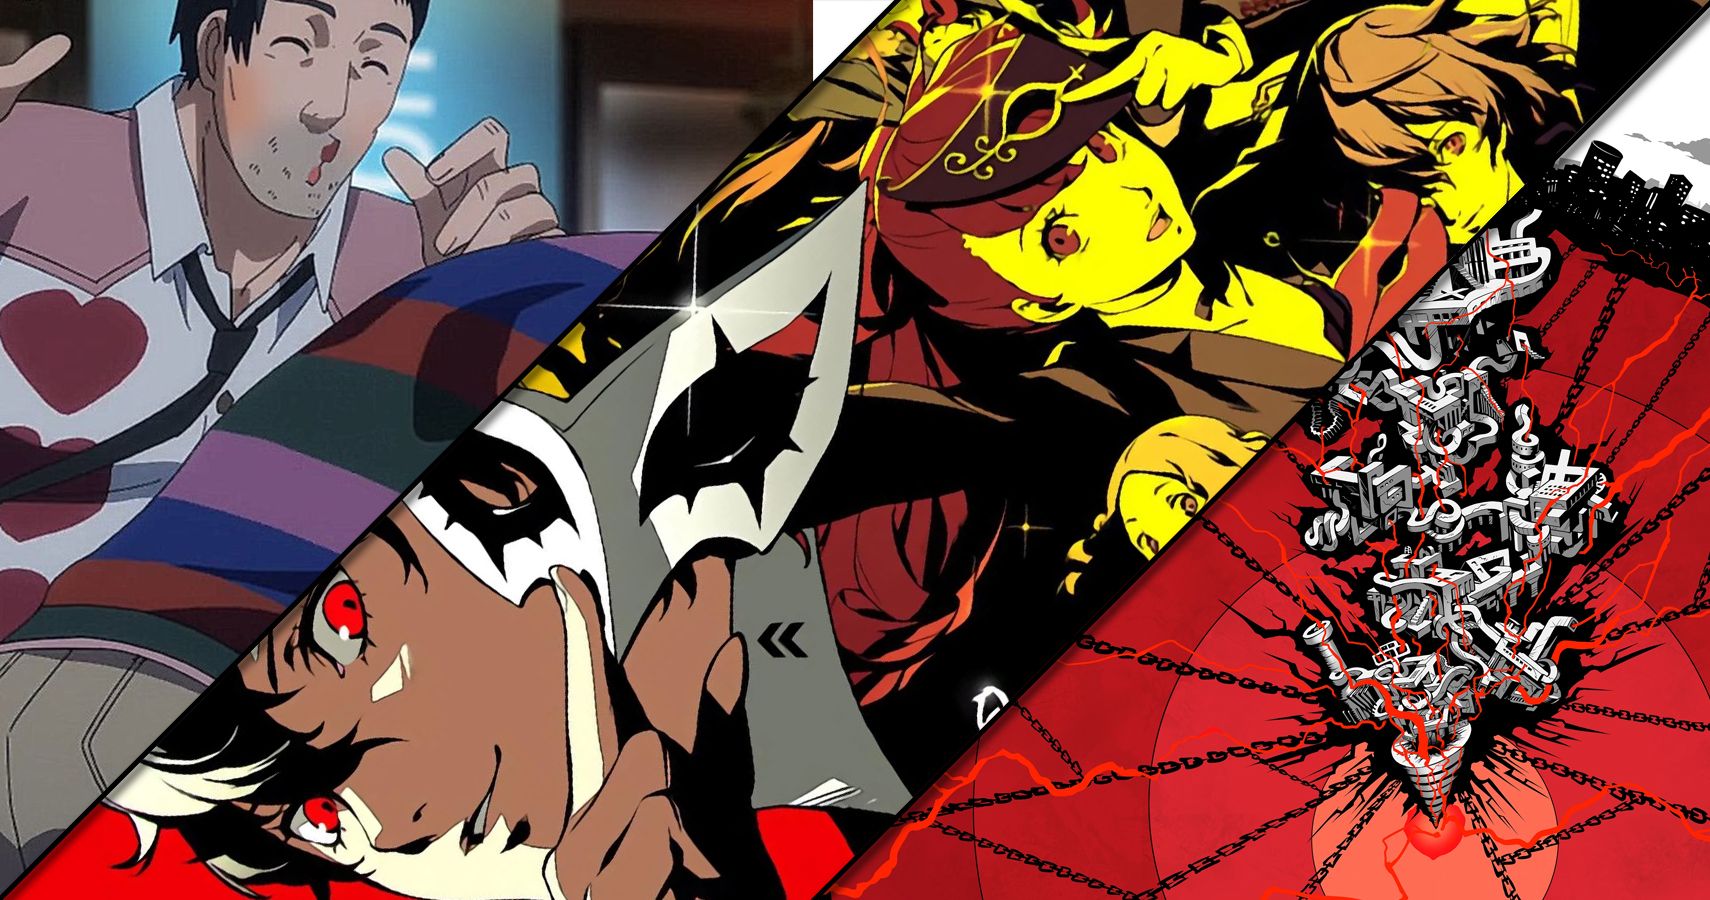 5 Things They Fixed In Persona 5 Royal (& 5 Things They Didn't)